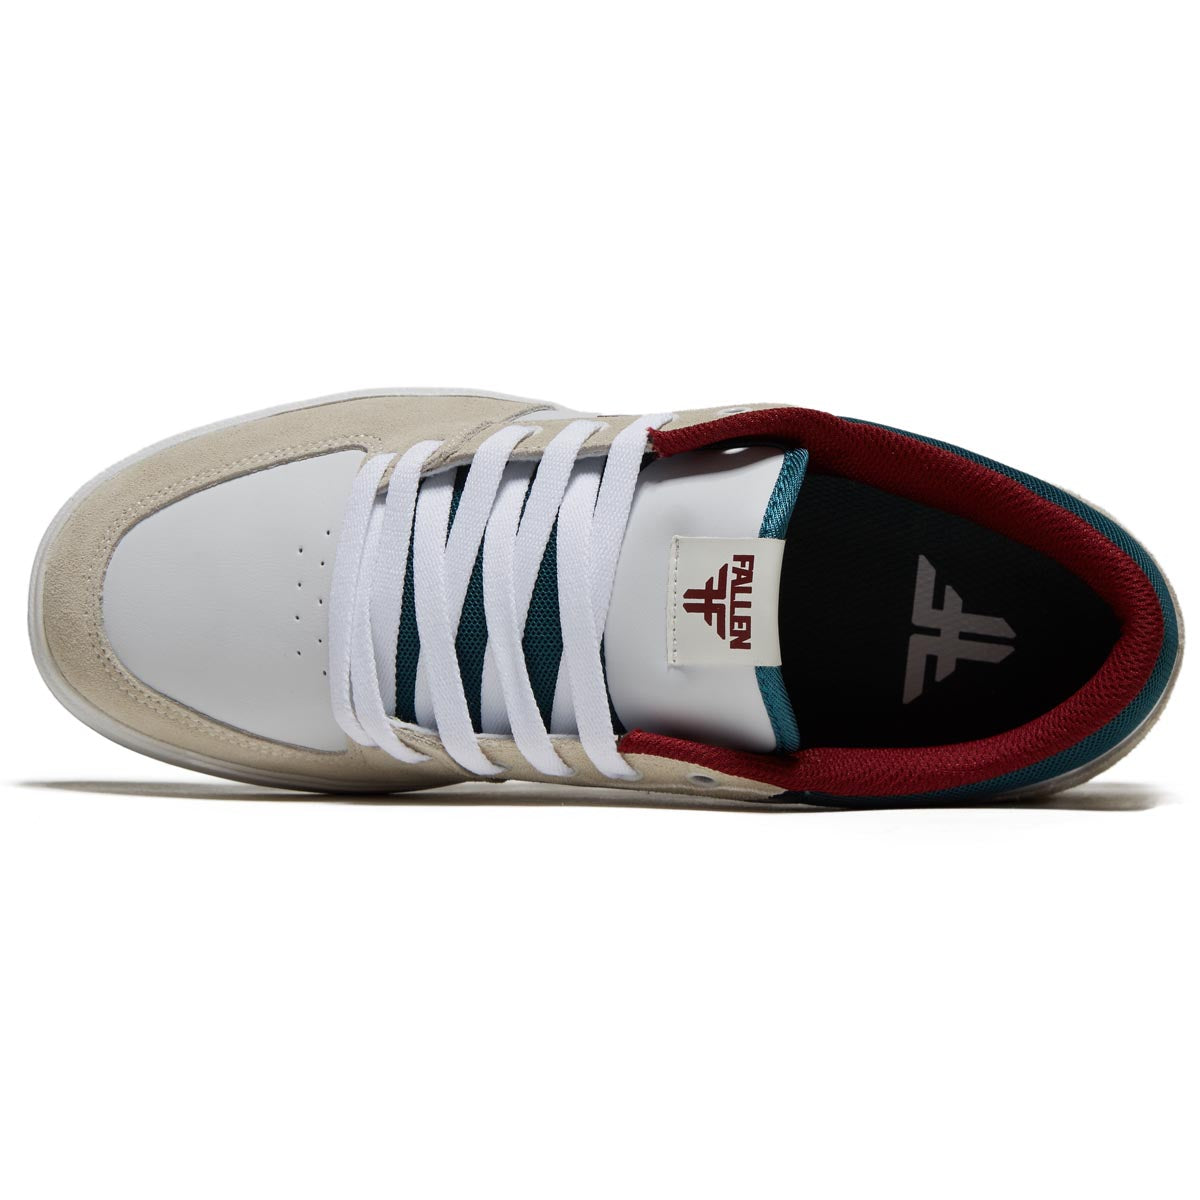 Fallen Patriot Shoes - White/Teal/Burgundy image 3